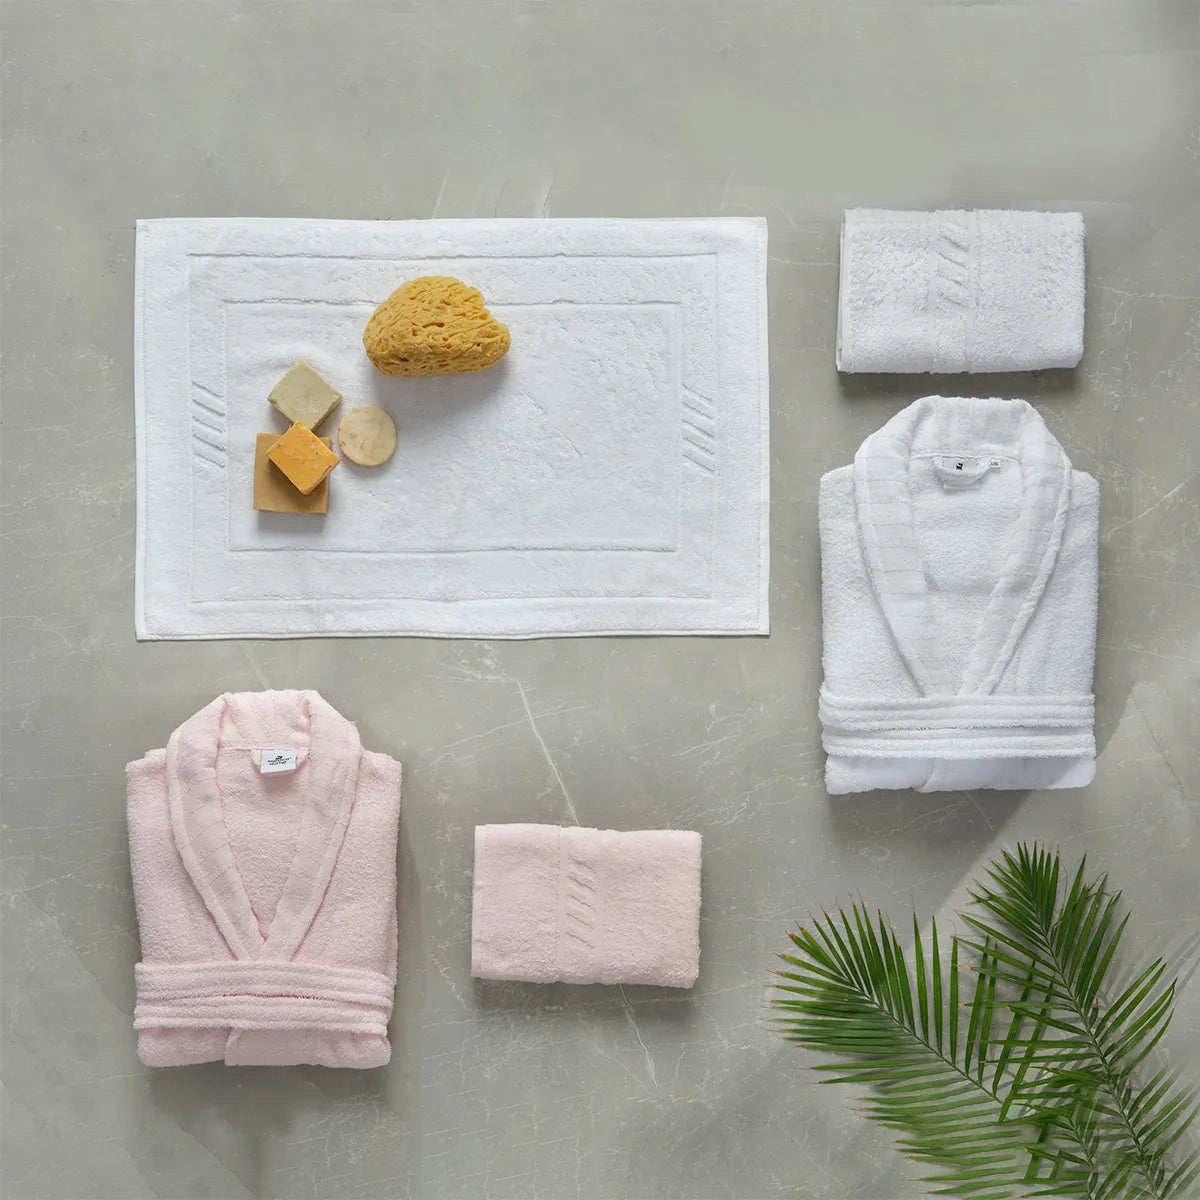 5-piece bathrobe set including S/M and L/XL bathrobes, along with 2 face towels (20 in x 35 in) and 1 face towel (20 in x 28 in).